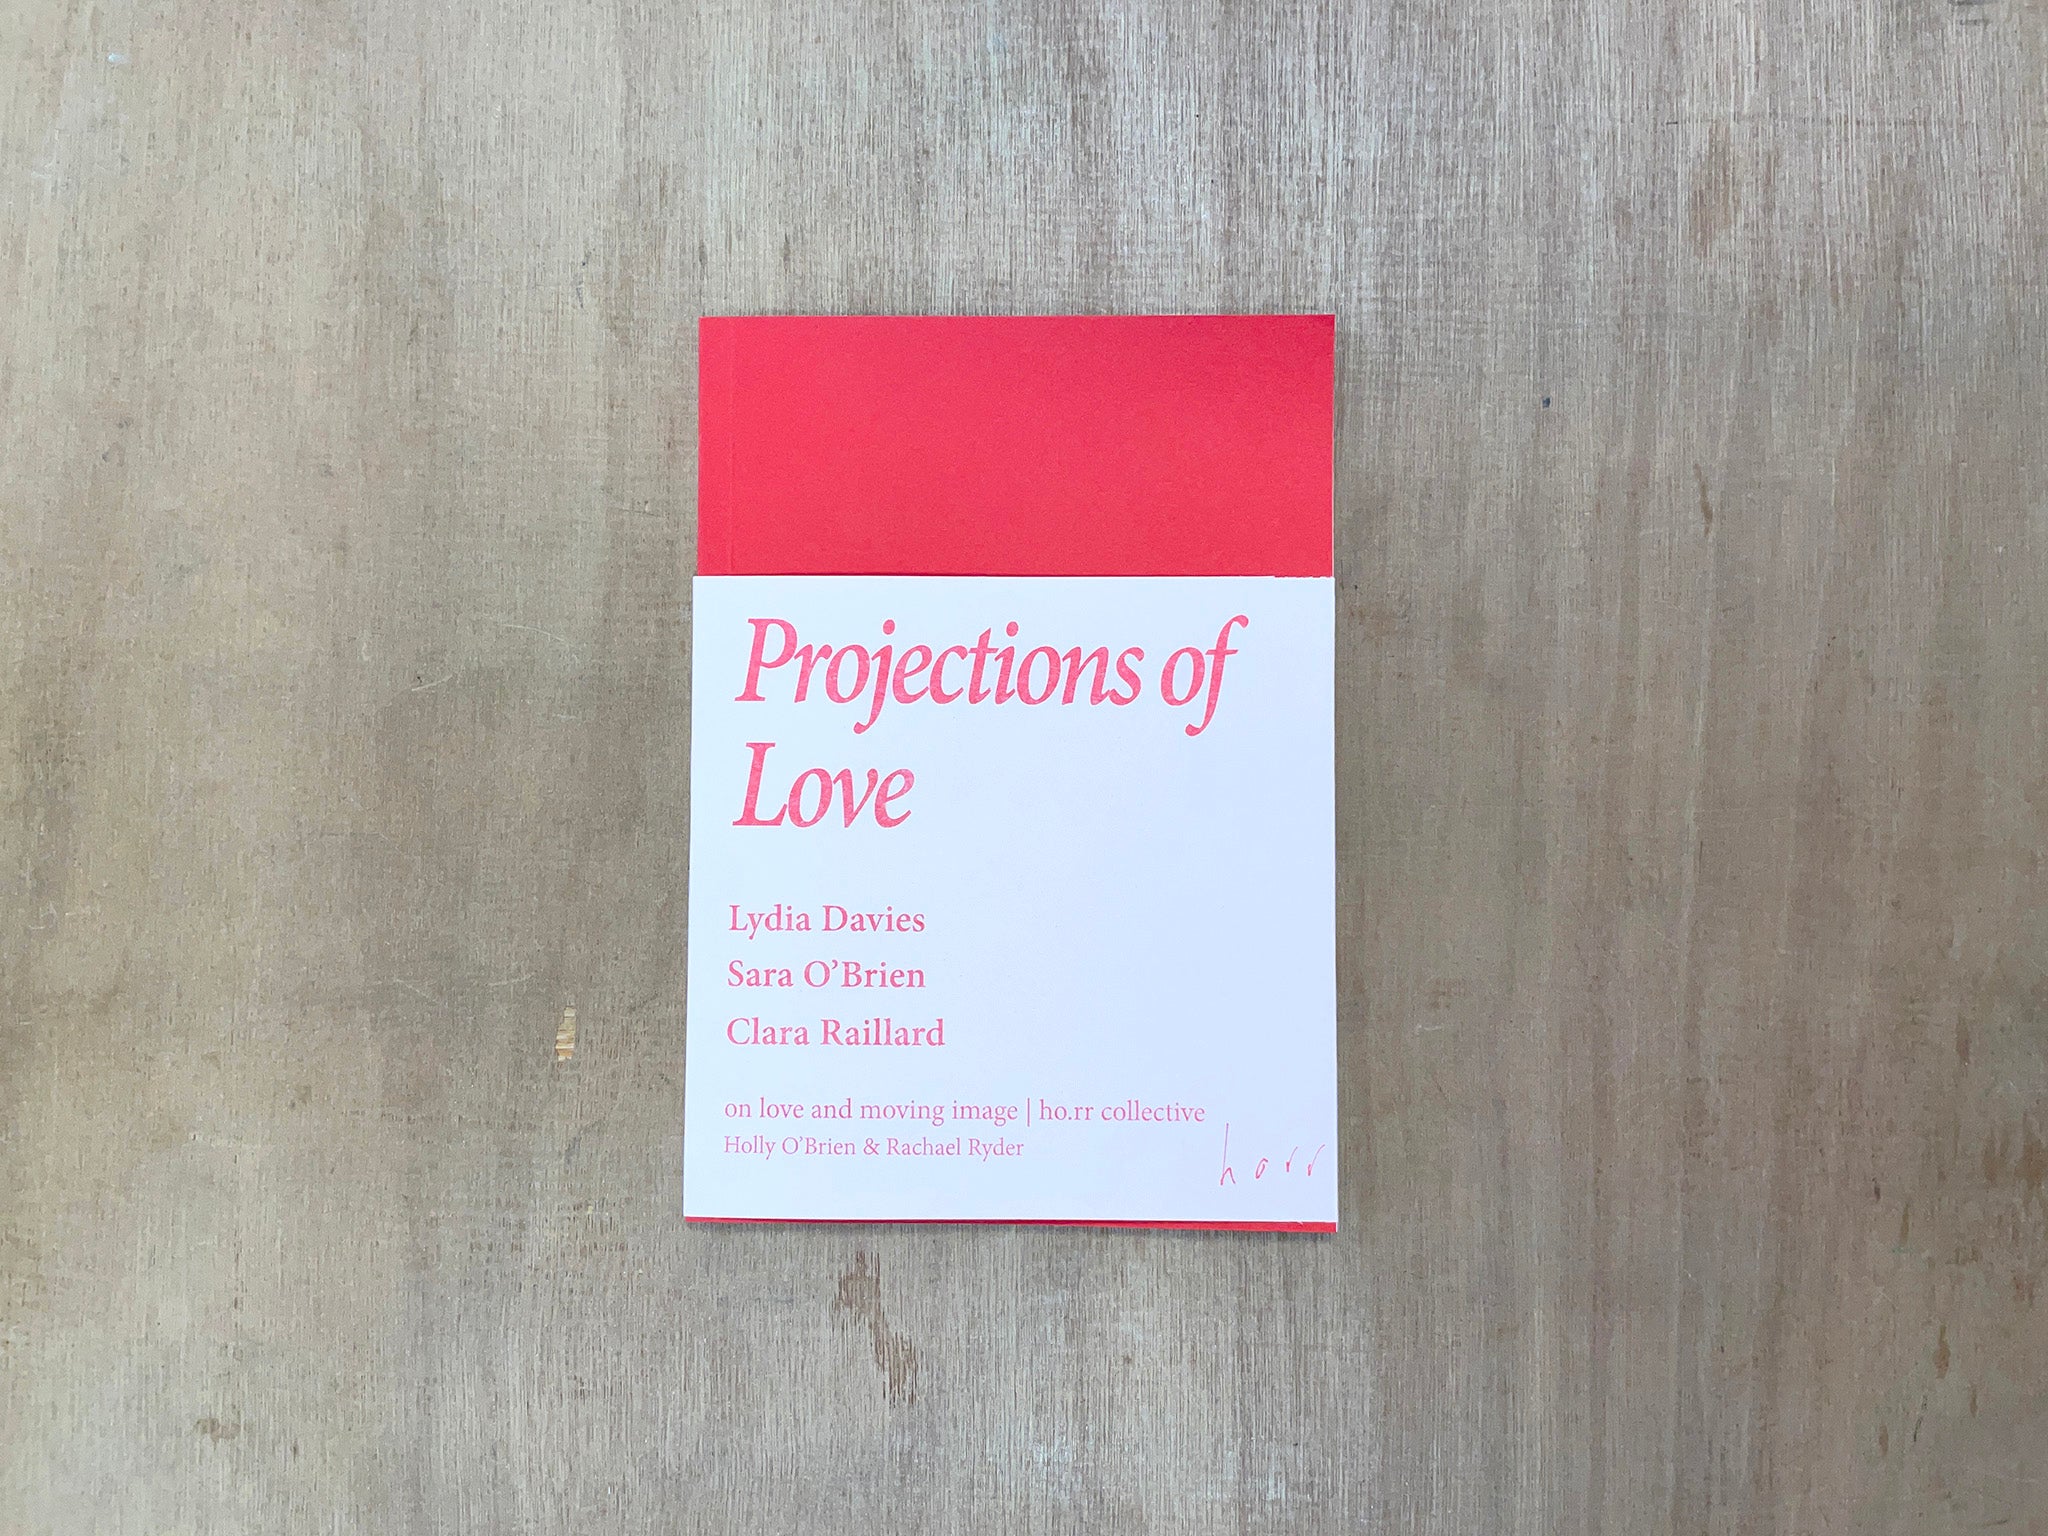 PROJECTIONS OF LOVE: ON LOVE AND MOVING IMAGE by Various Authors